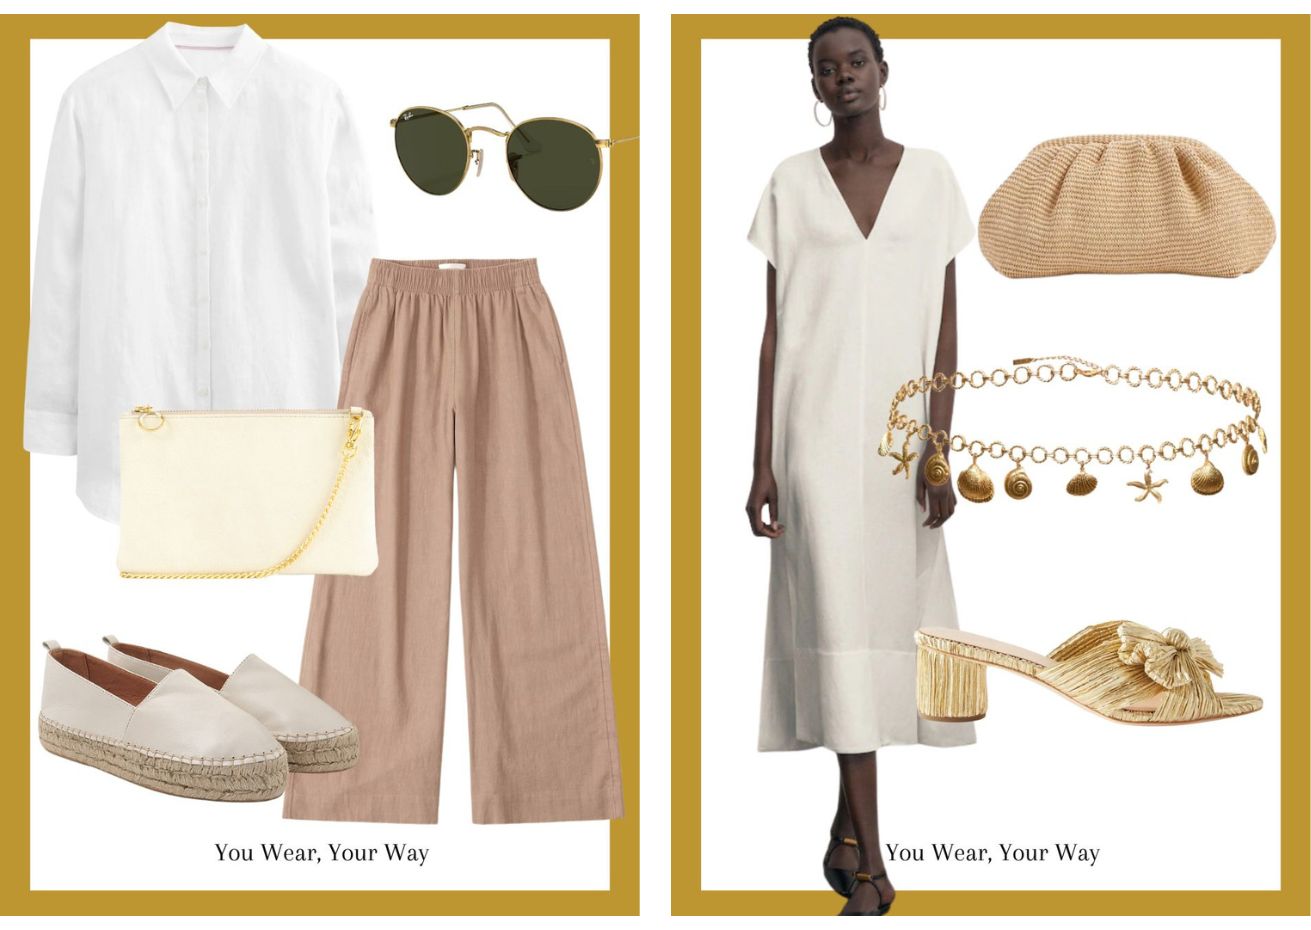 Oman style - Dida Ritchie rosa leather clutch bag, dida ritchie ivory leather espadrilles